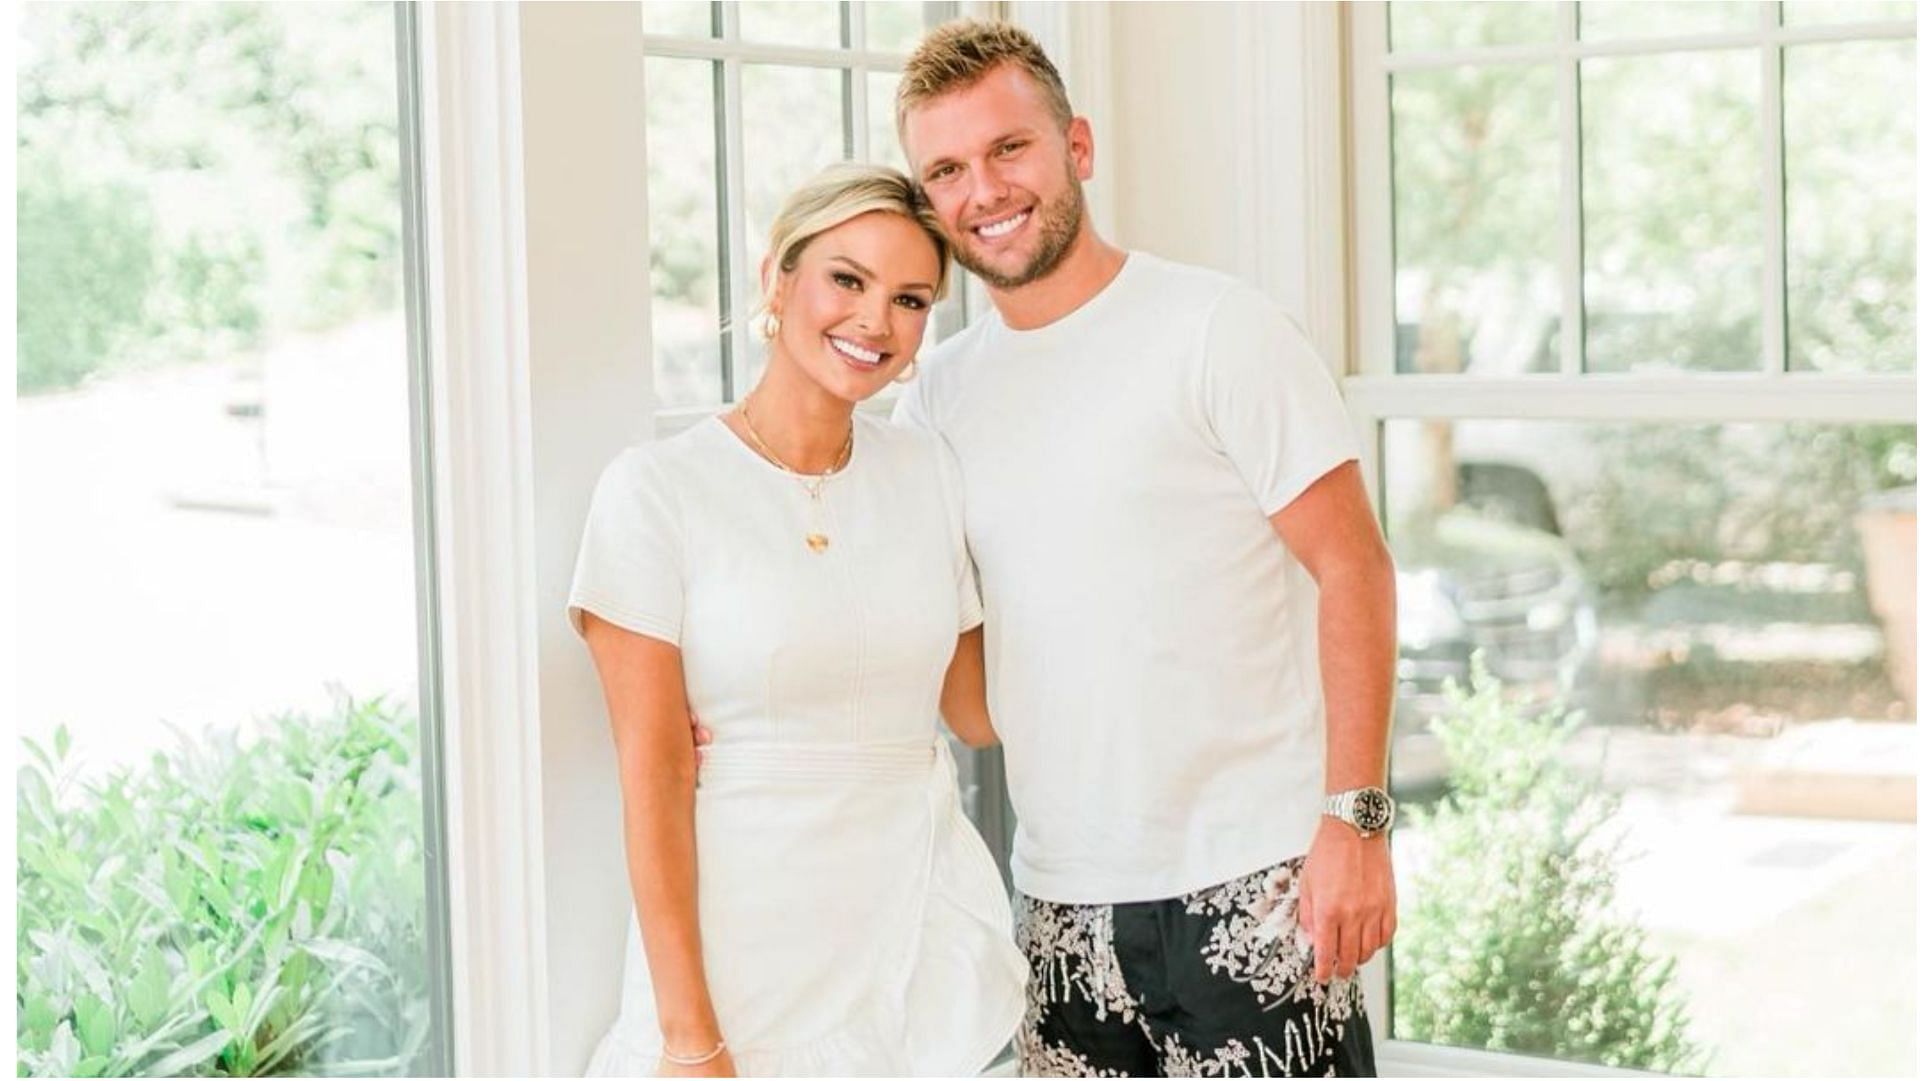 Chase Chrisley and Emmy Medders are now engaged (Image via chasechrisley/Instagram)